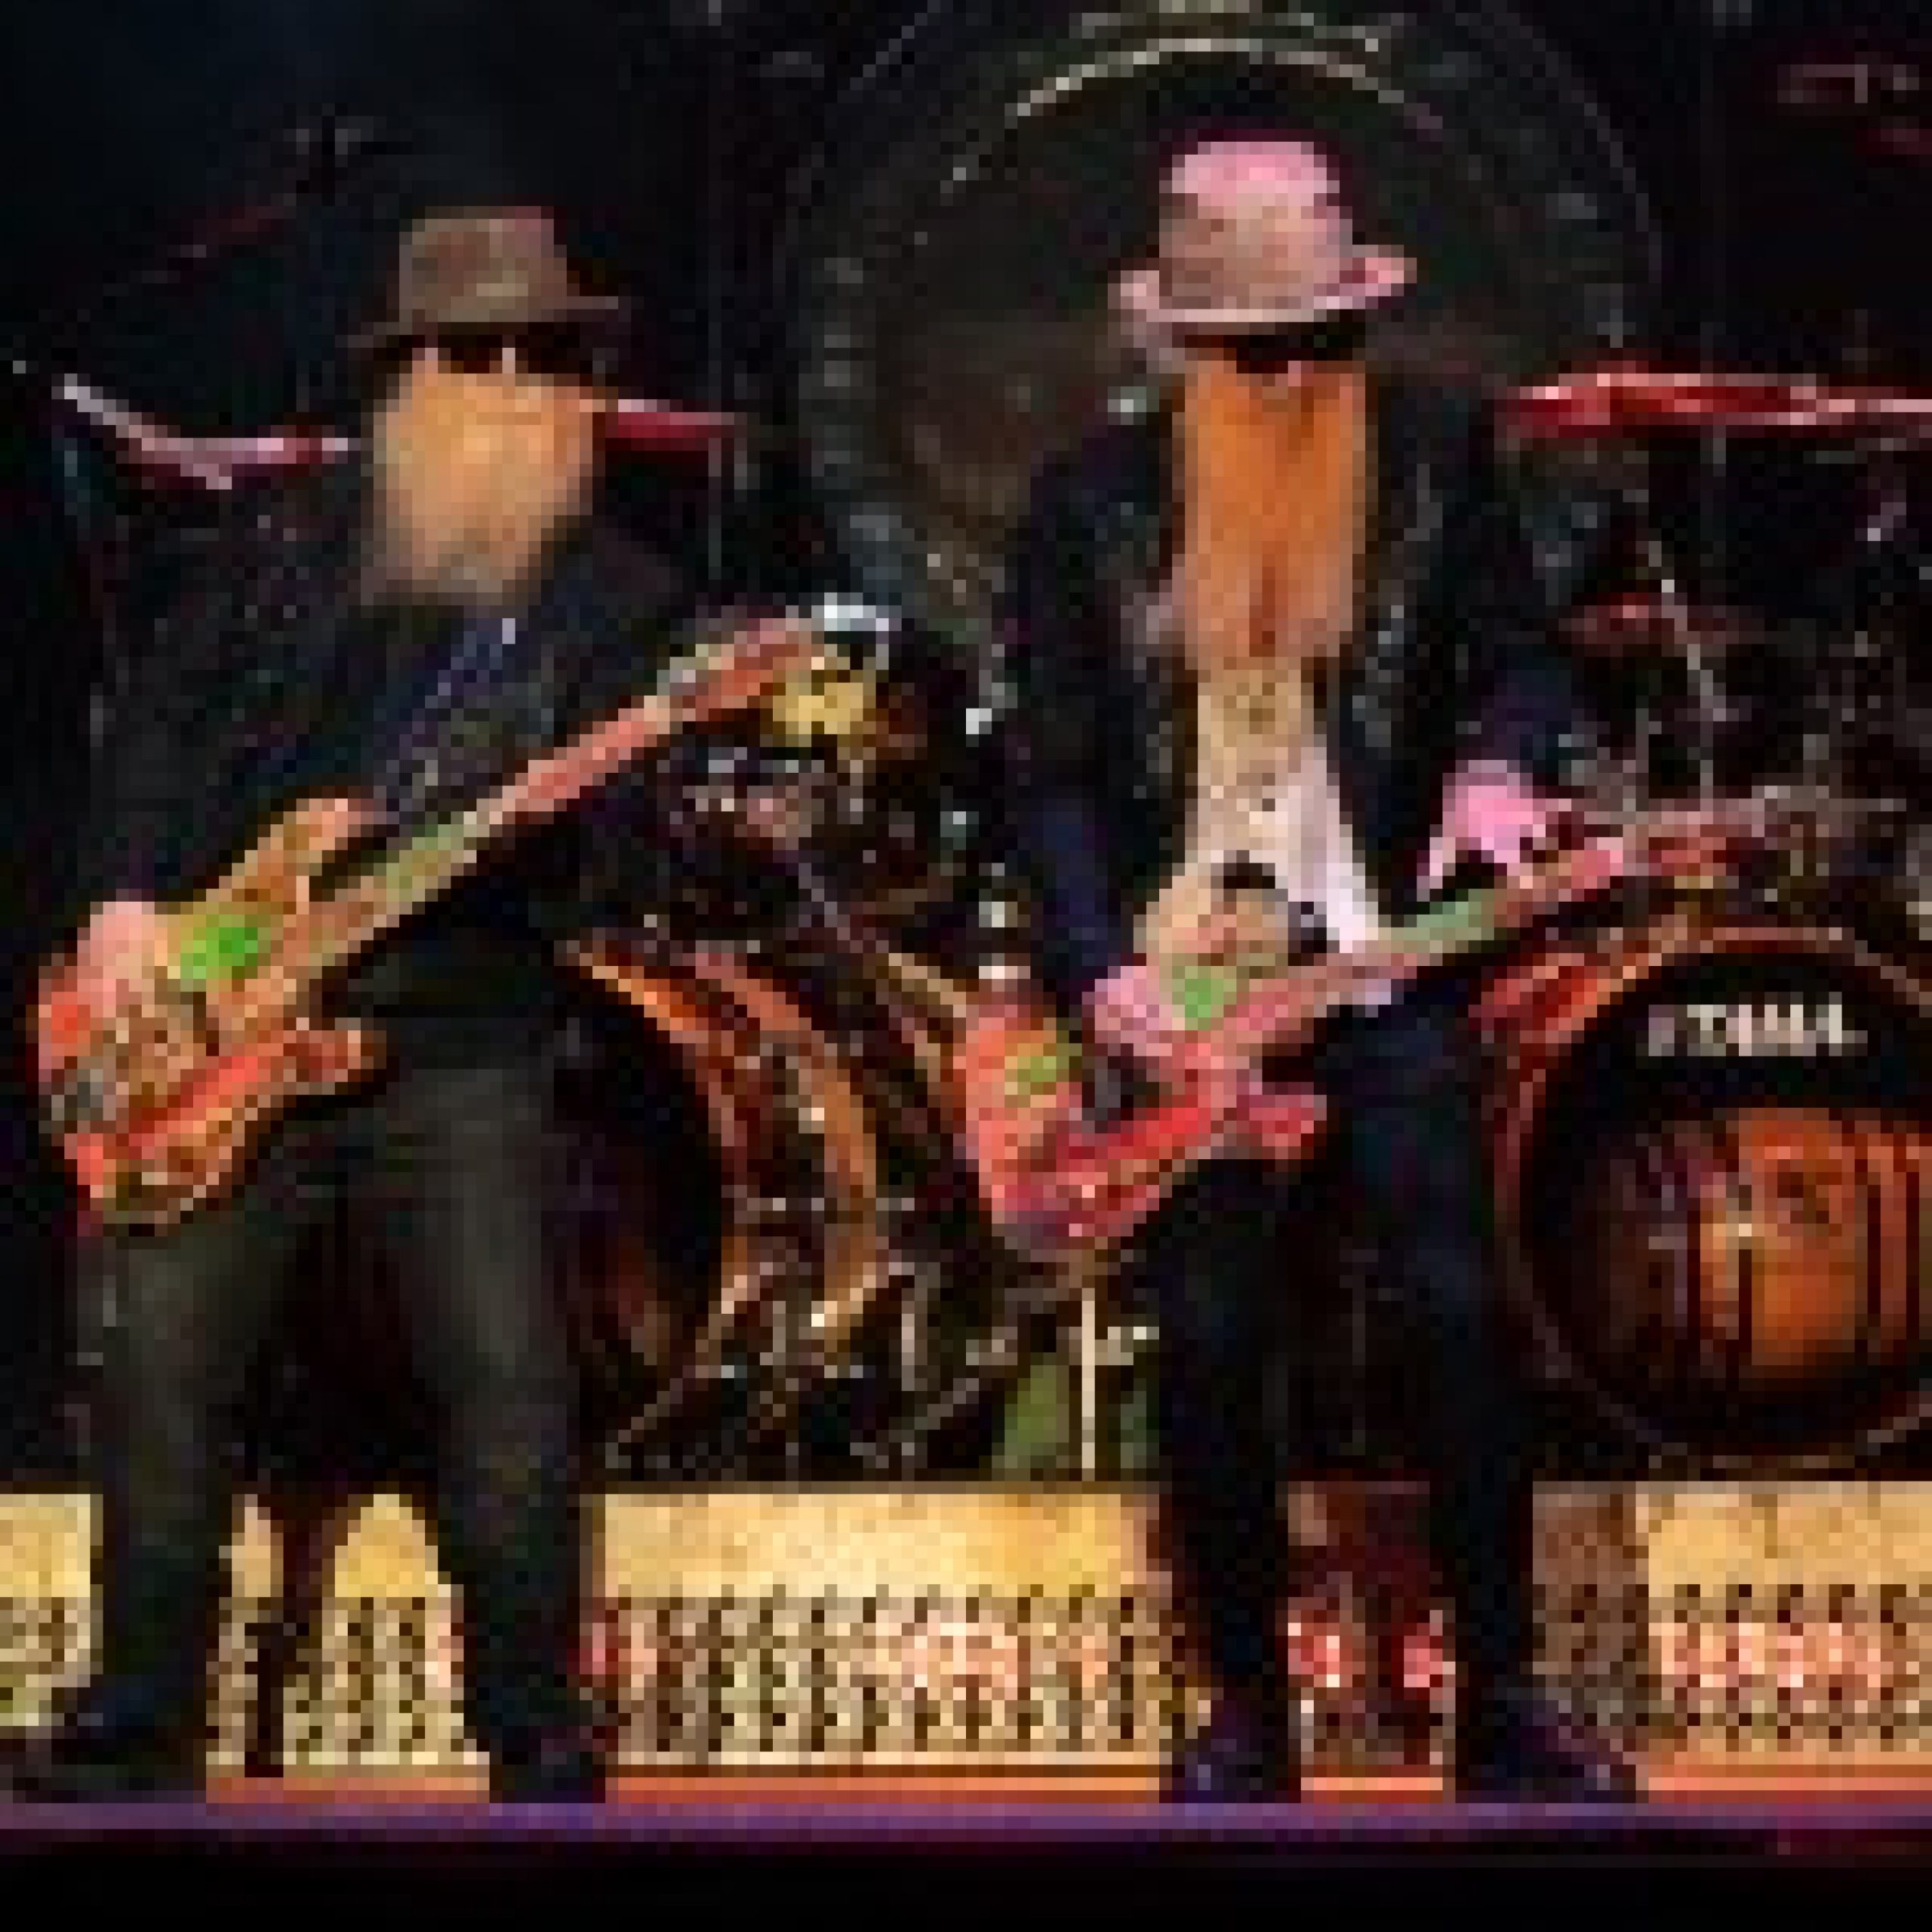 ZZ Top Plays First Concert Following the Death of Longtime Bassist Dusty Hill